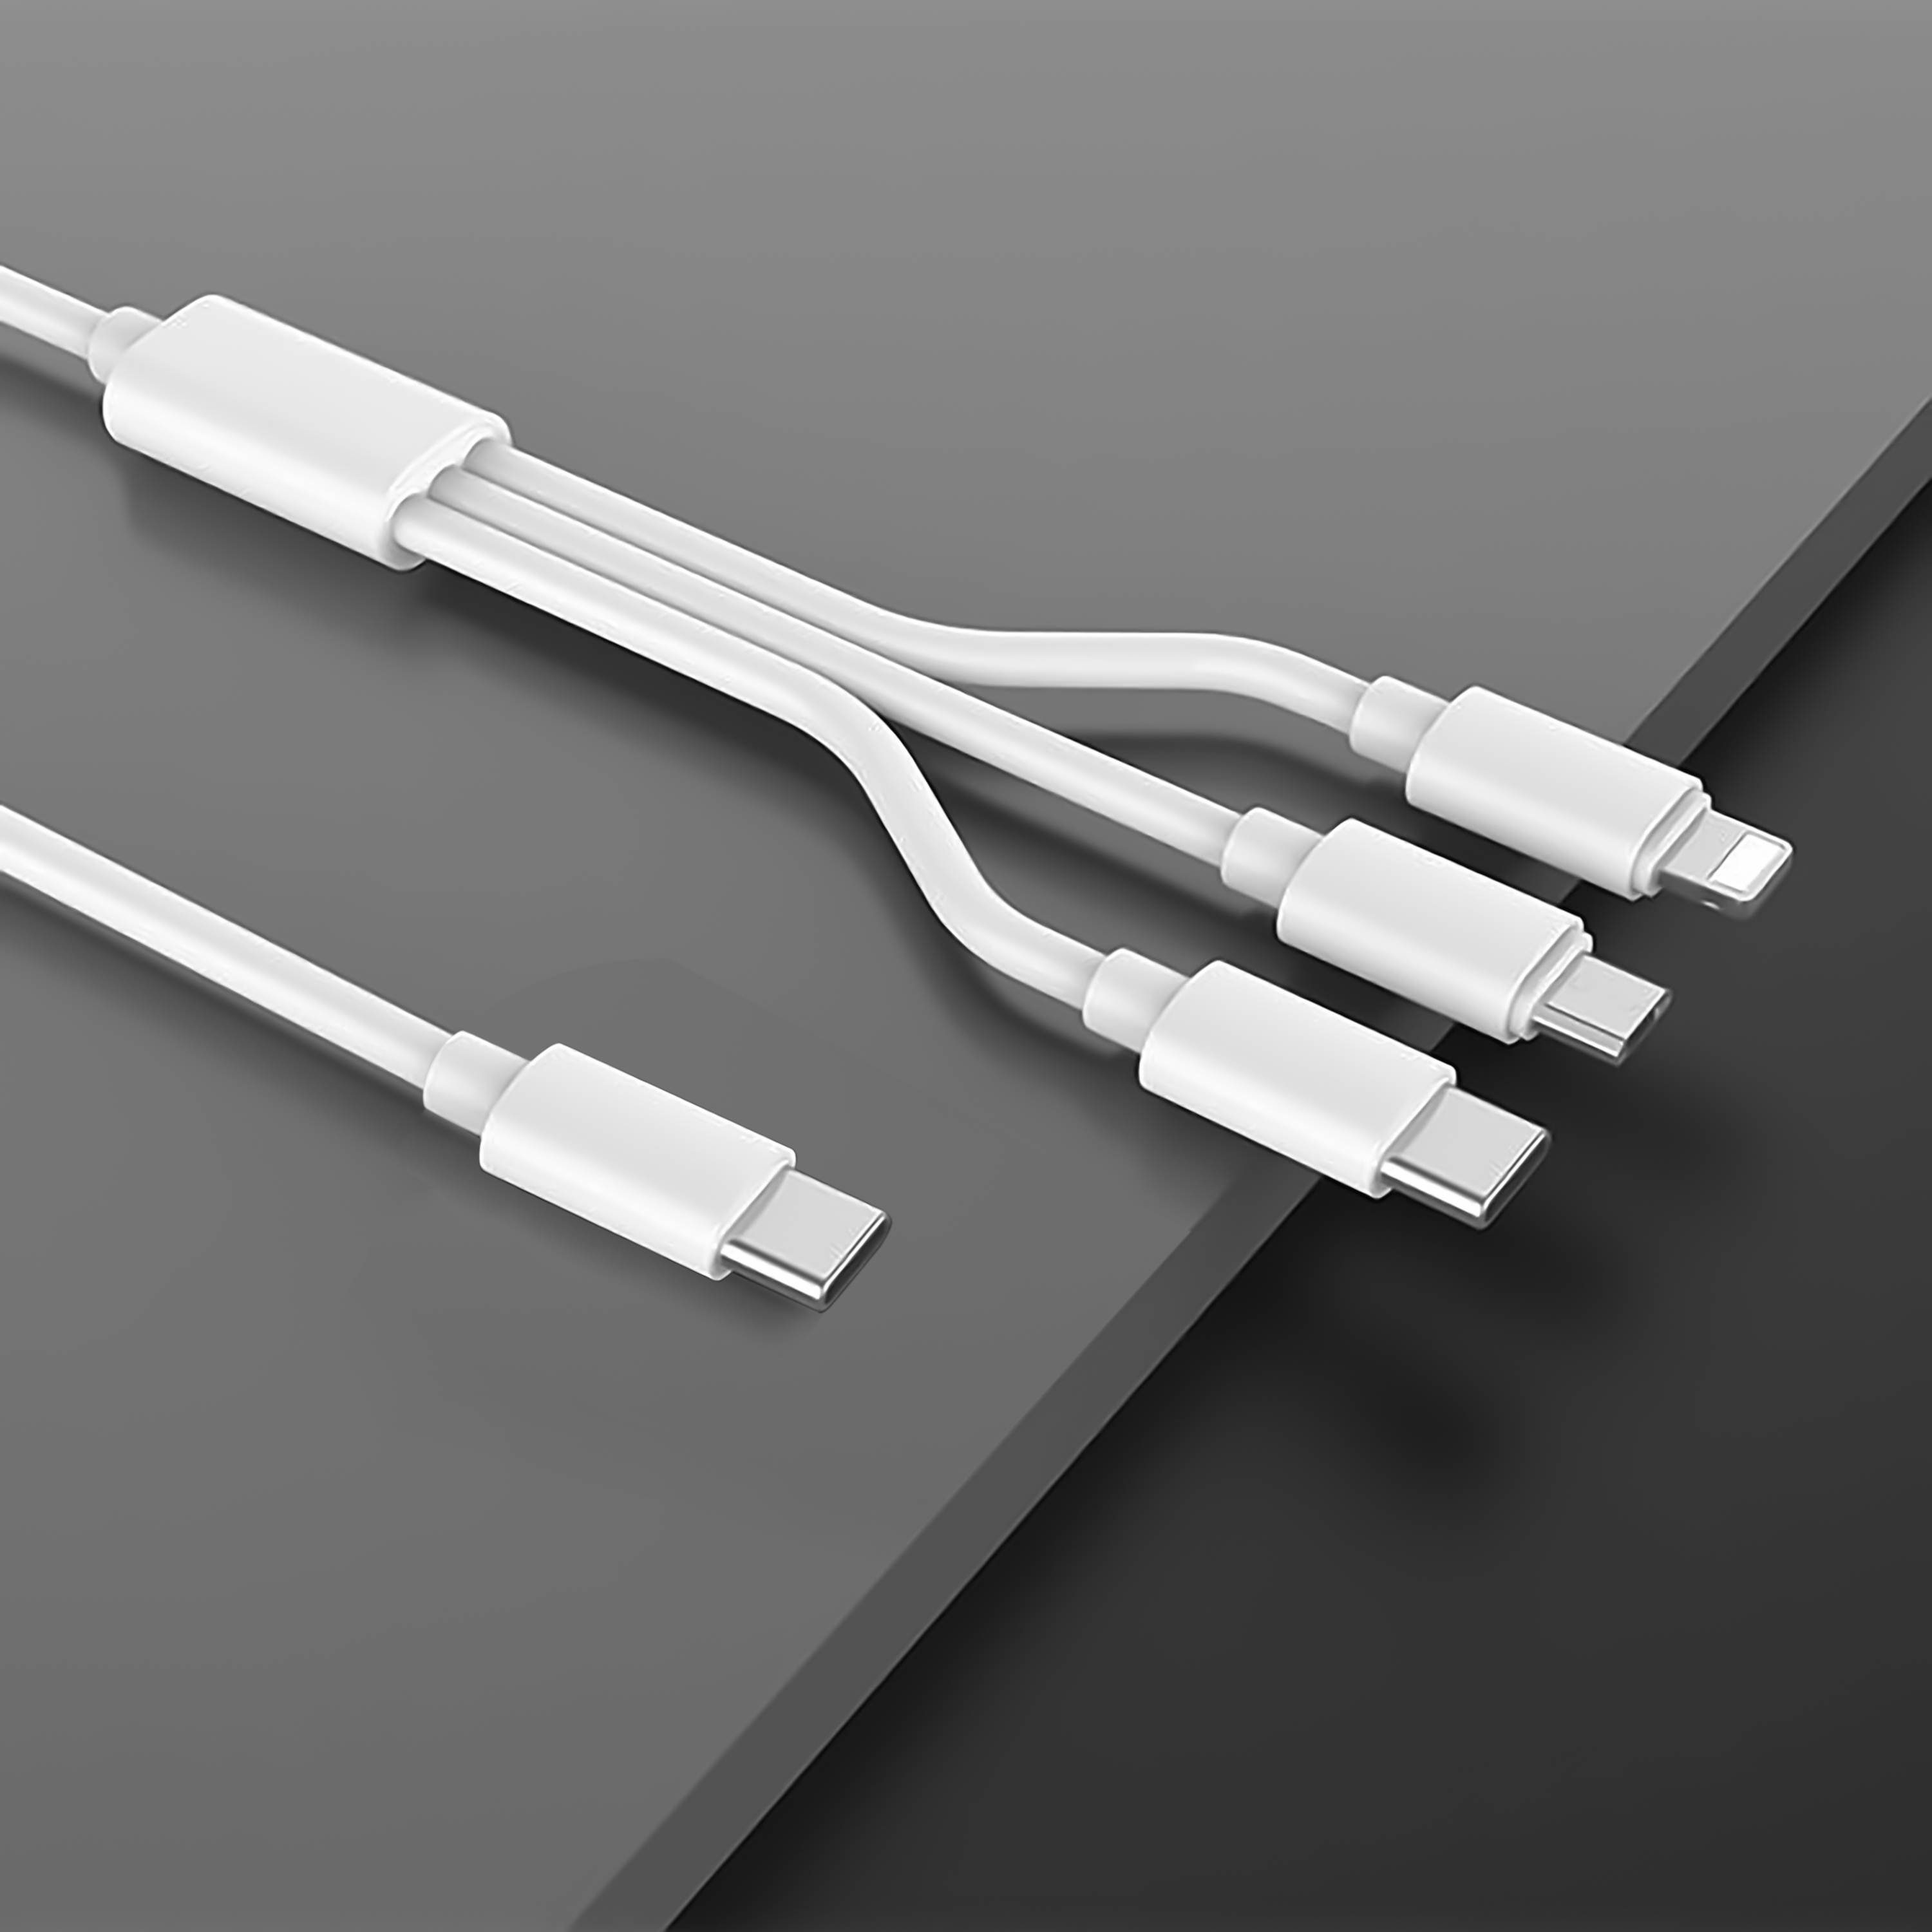 MORRENT Multi USB-C Kabel, Universal Ladekabel [1.2M] Schnell Ladekabel 3  in 1 Mehrfach Ladekabel USB - C Lightning Cable für iPhone, Android Galaxy,  Huawei, Oneplus, Sony, LG, Honor View-Gray Lightningkabel